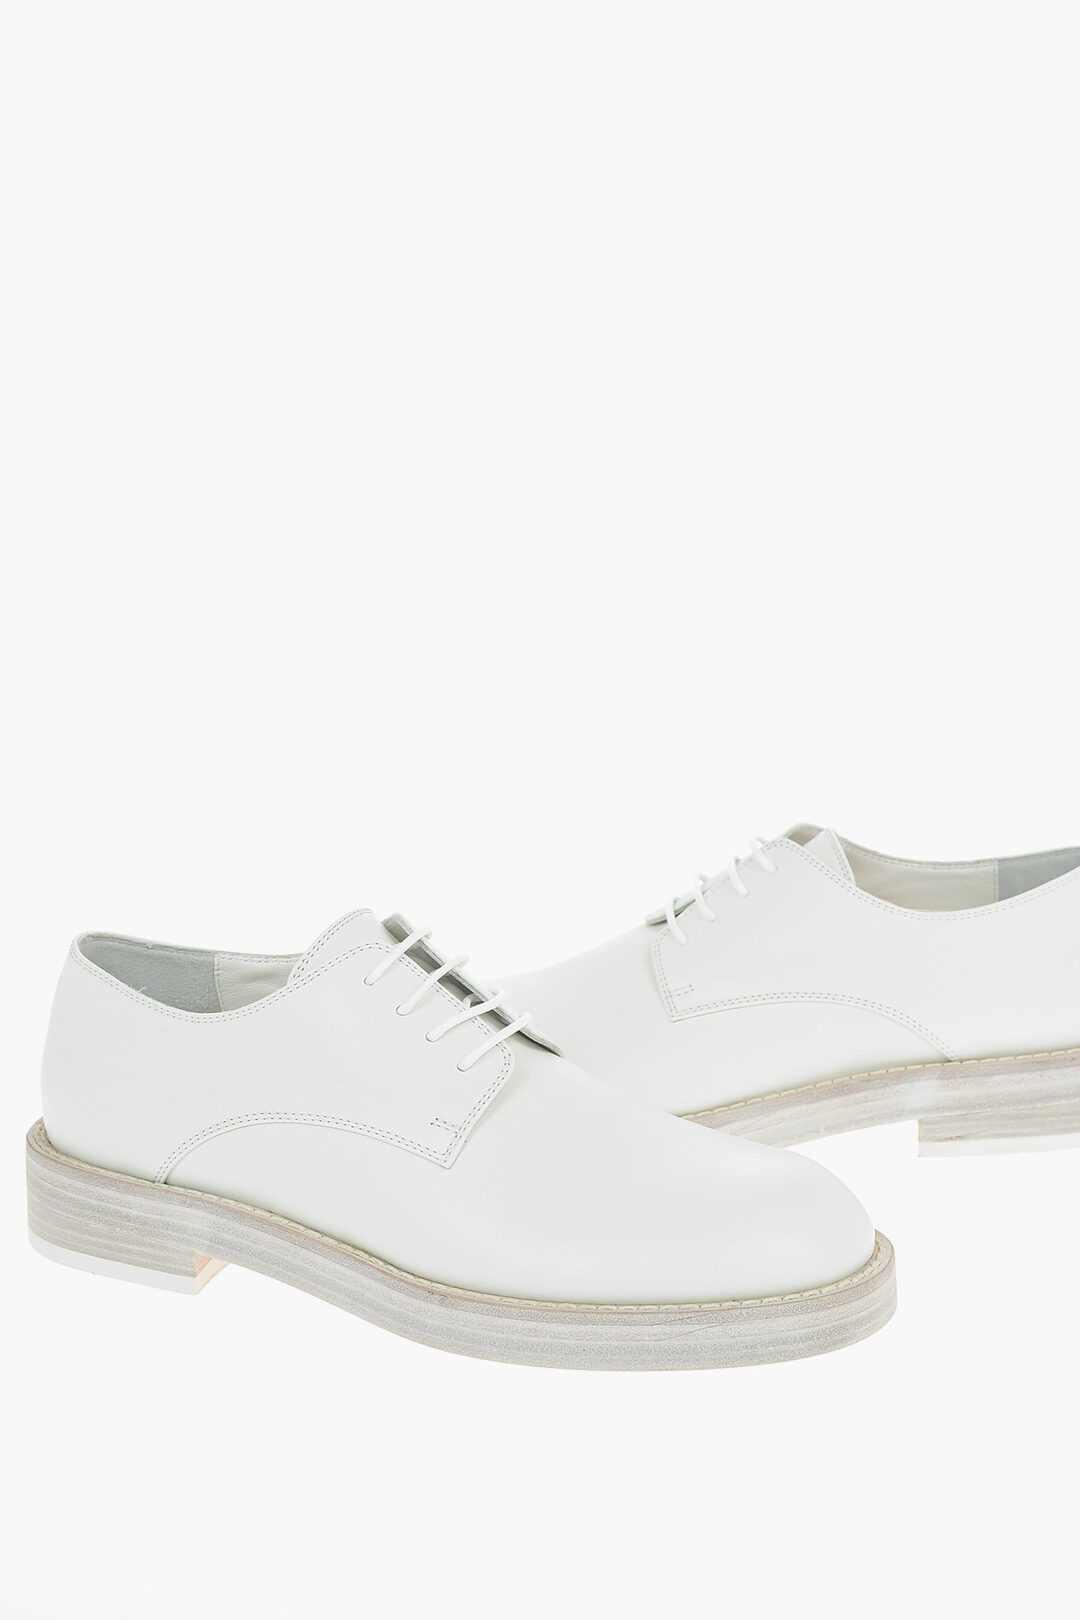 Ann Demeulemeester Leather OLIVER Lace-up Derby Shoes men - Glamood Outlet